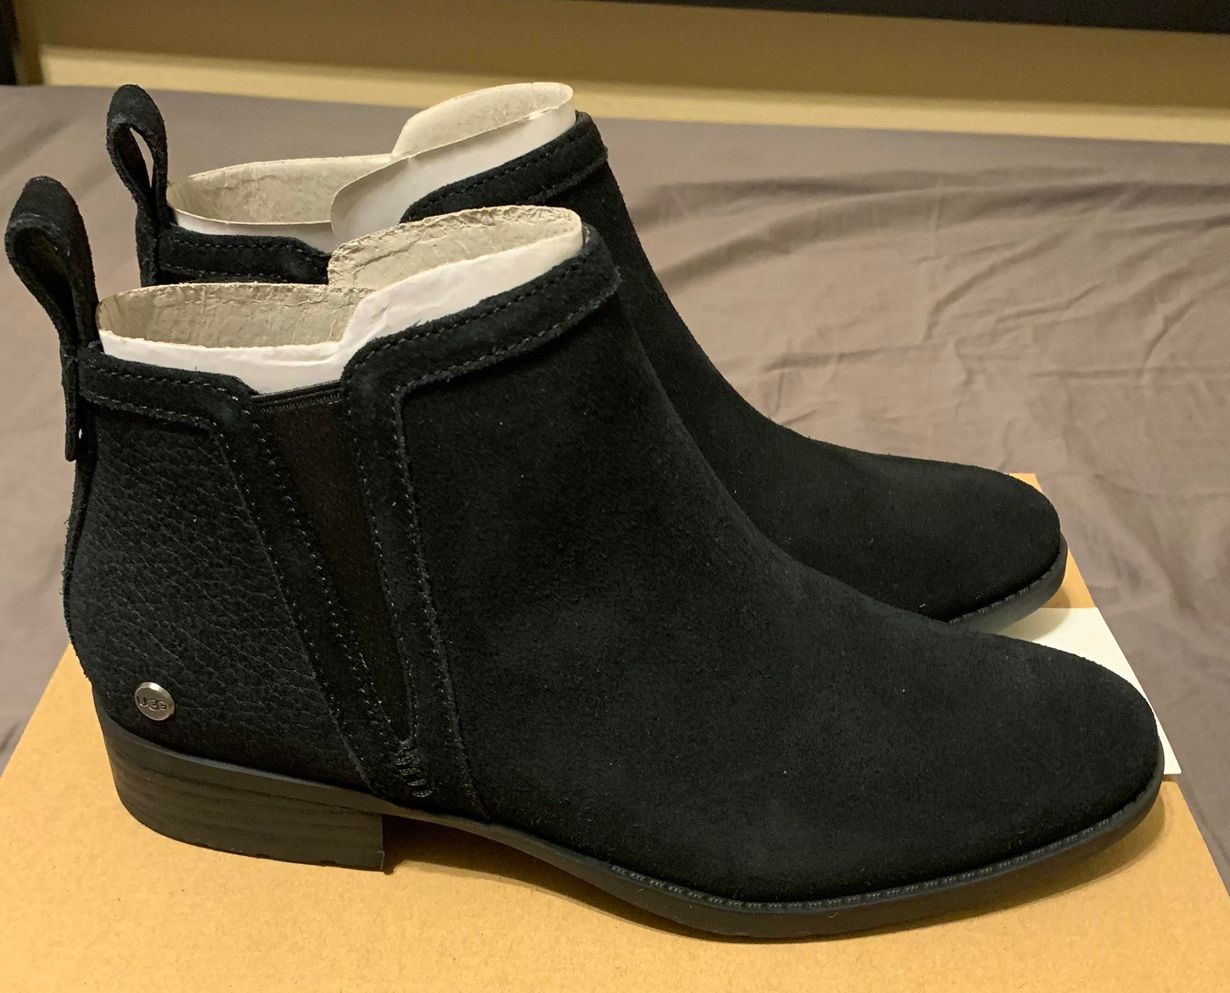 ugg mcclaire ankle boot